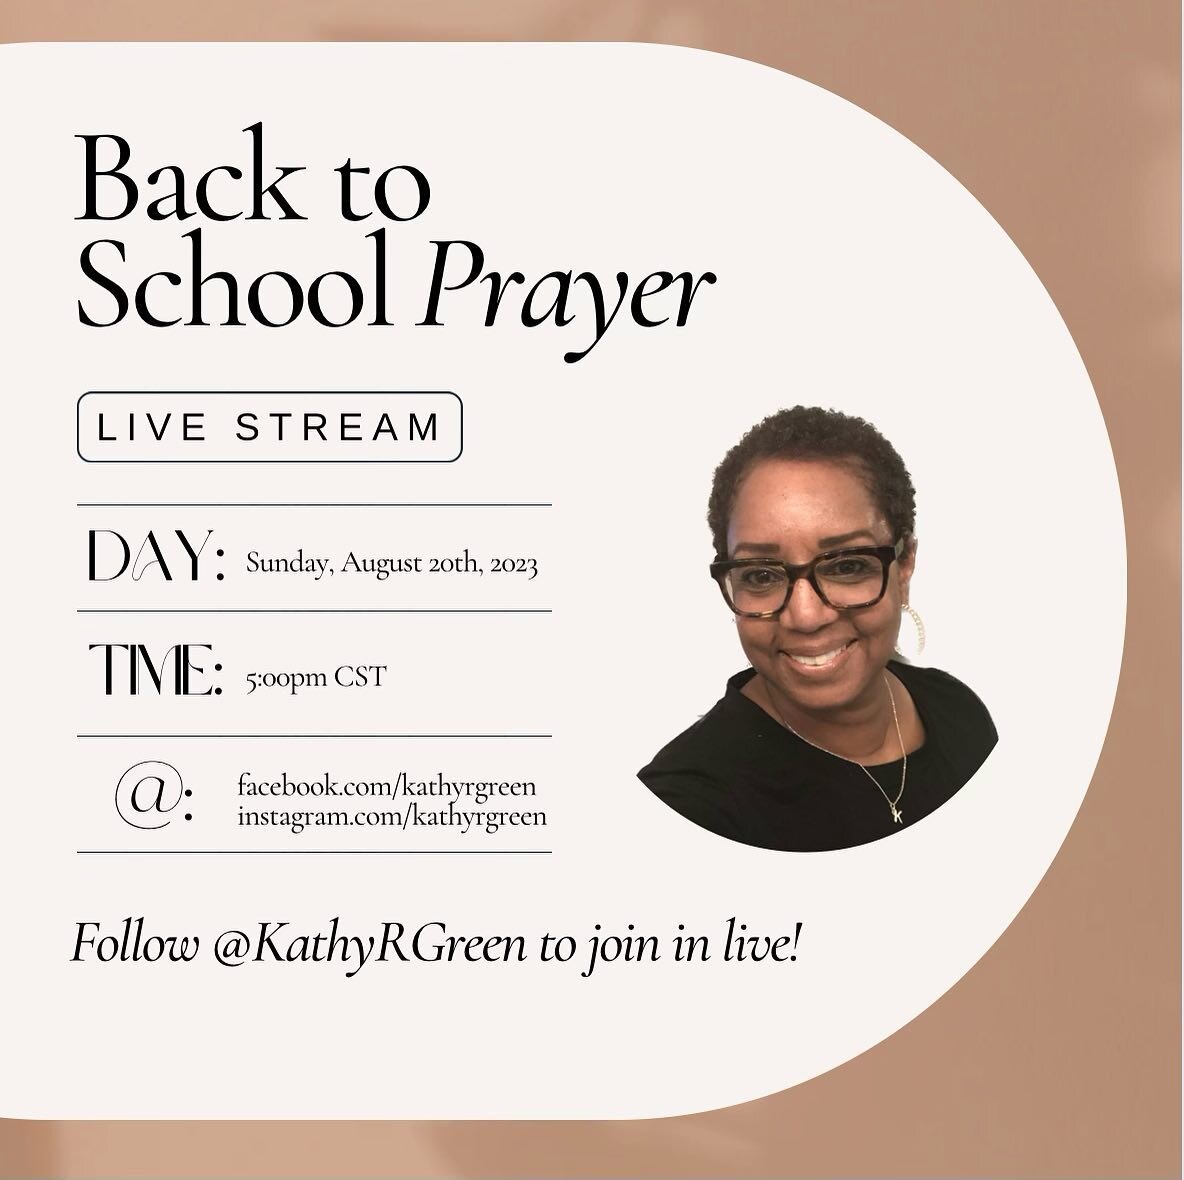 Today more than ever, I am keenly aware of the importance of covering  children, youth, college students, teachers and faculty returning back to school. 

Please join me tomorrow evening, August 20th at 5:00 pm CST and let&rsquo;s go before the thron